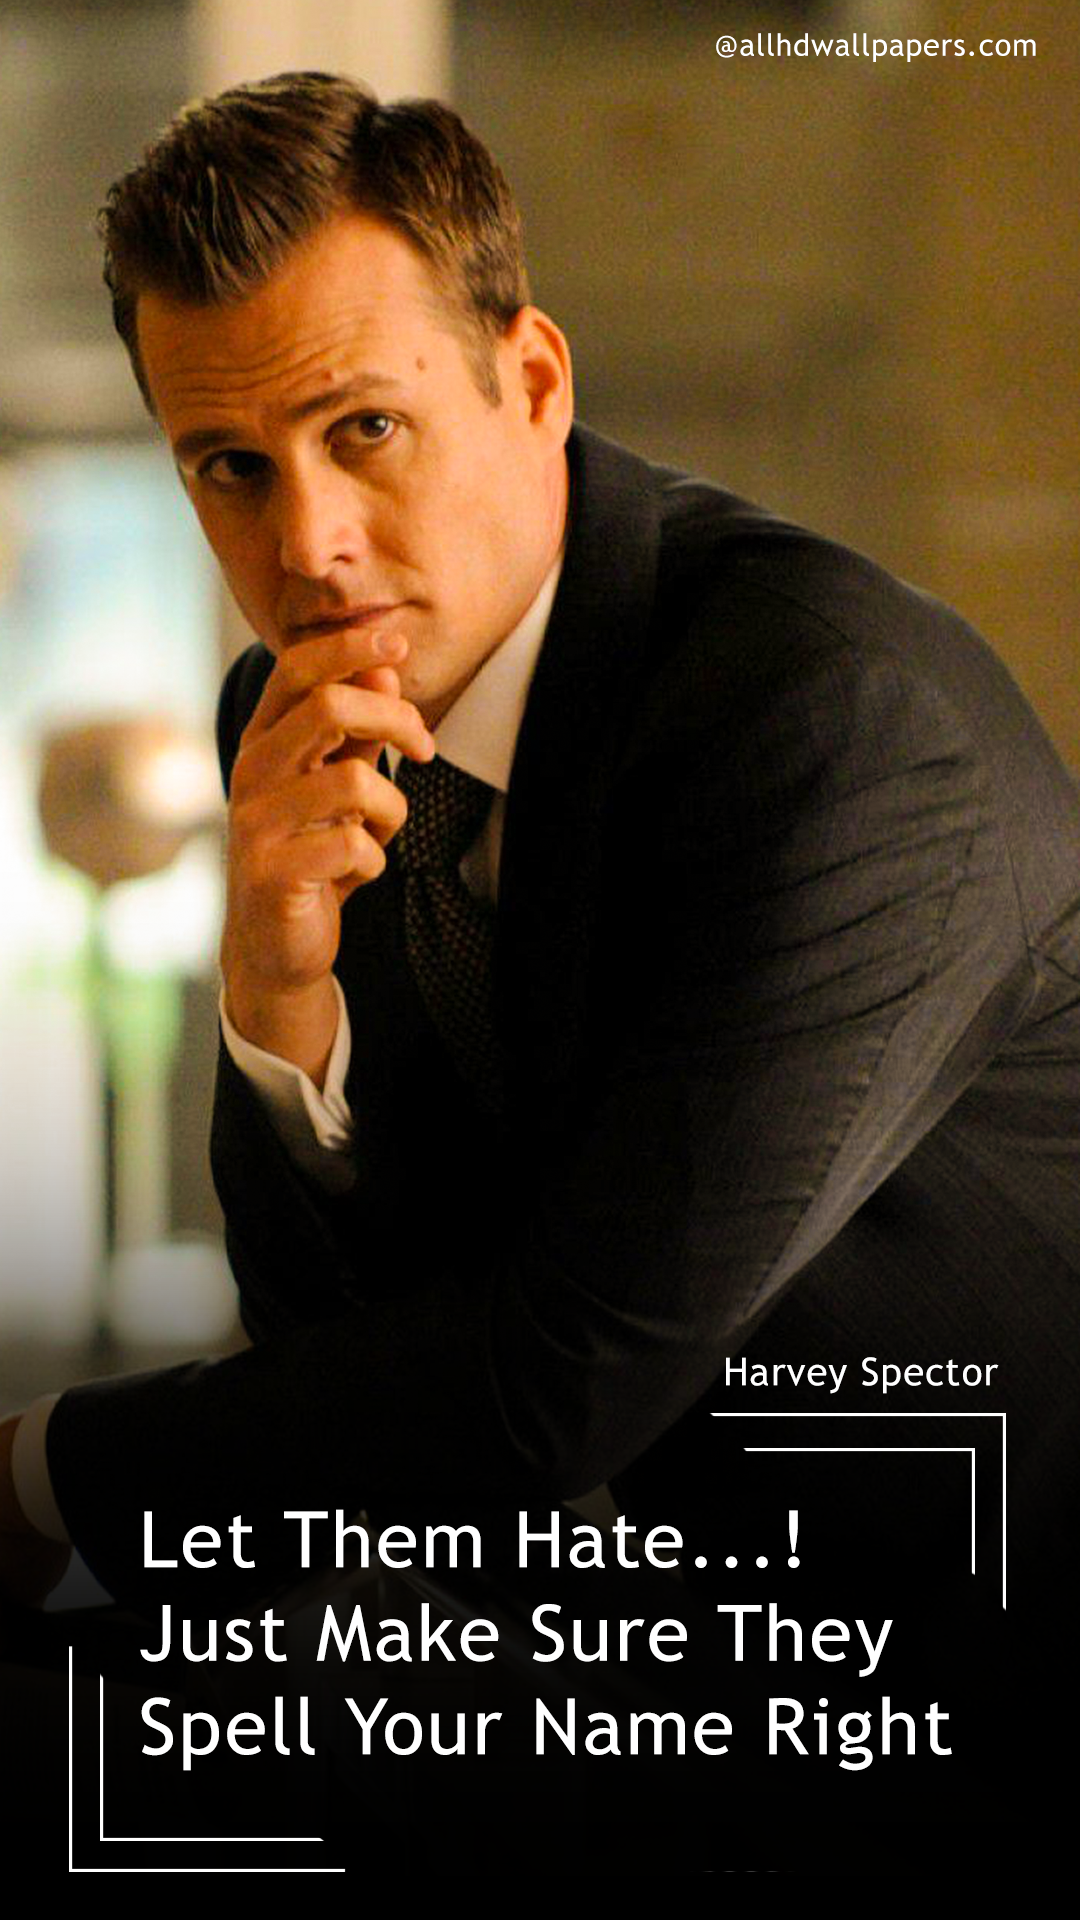 harvey specter wallpaper hd,movie,forehead,photo caption,suit,white collar worker